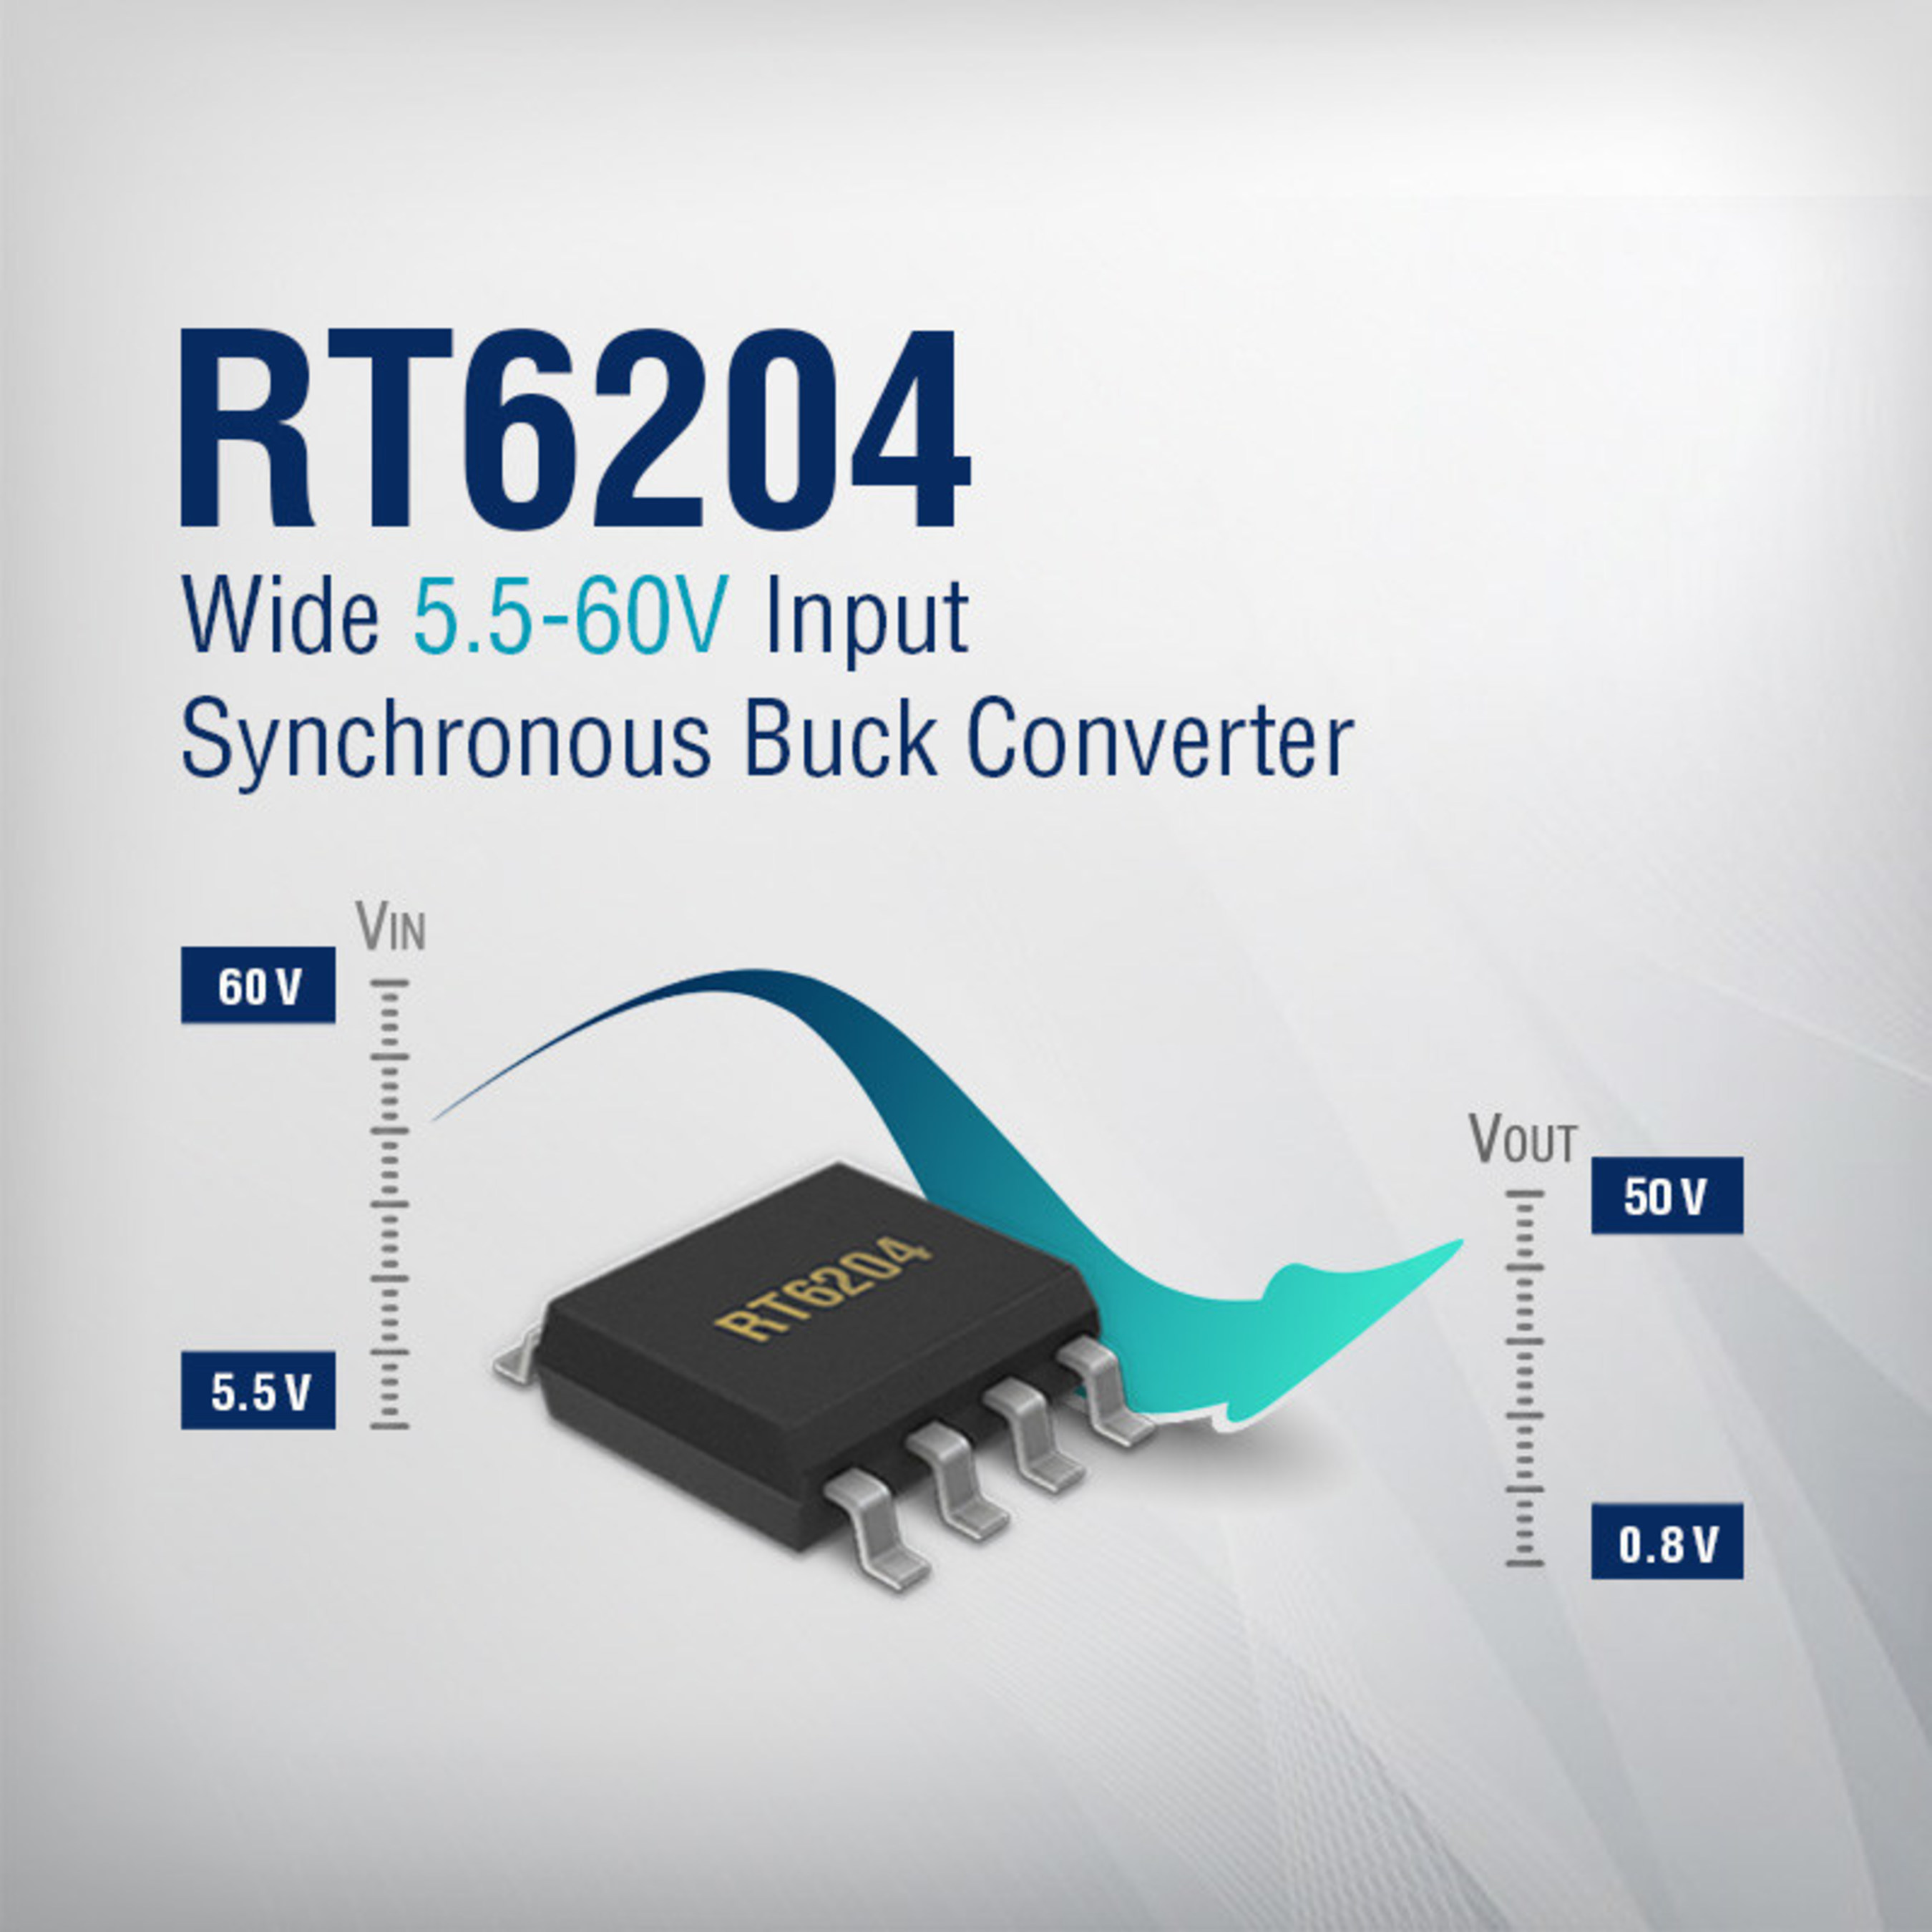 The RT6204 from Richtek is a 5.5V to 60V input, 0.8V to 50V output, 0.5A synchronous step-down converter, housed in a SOP-8 thermally effective package. The wide input range in combination with high step down capability makes it suitable for virtually any industrial application range, from battery fed automotive to 12V/24V/48V industrial supplies.